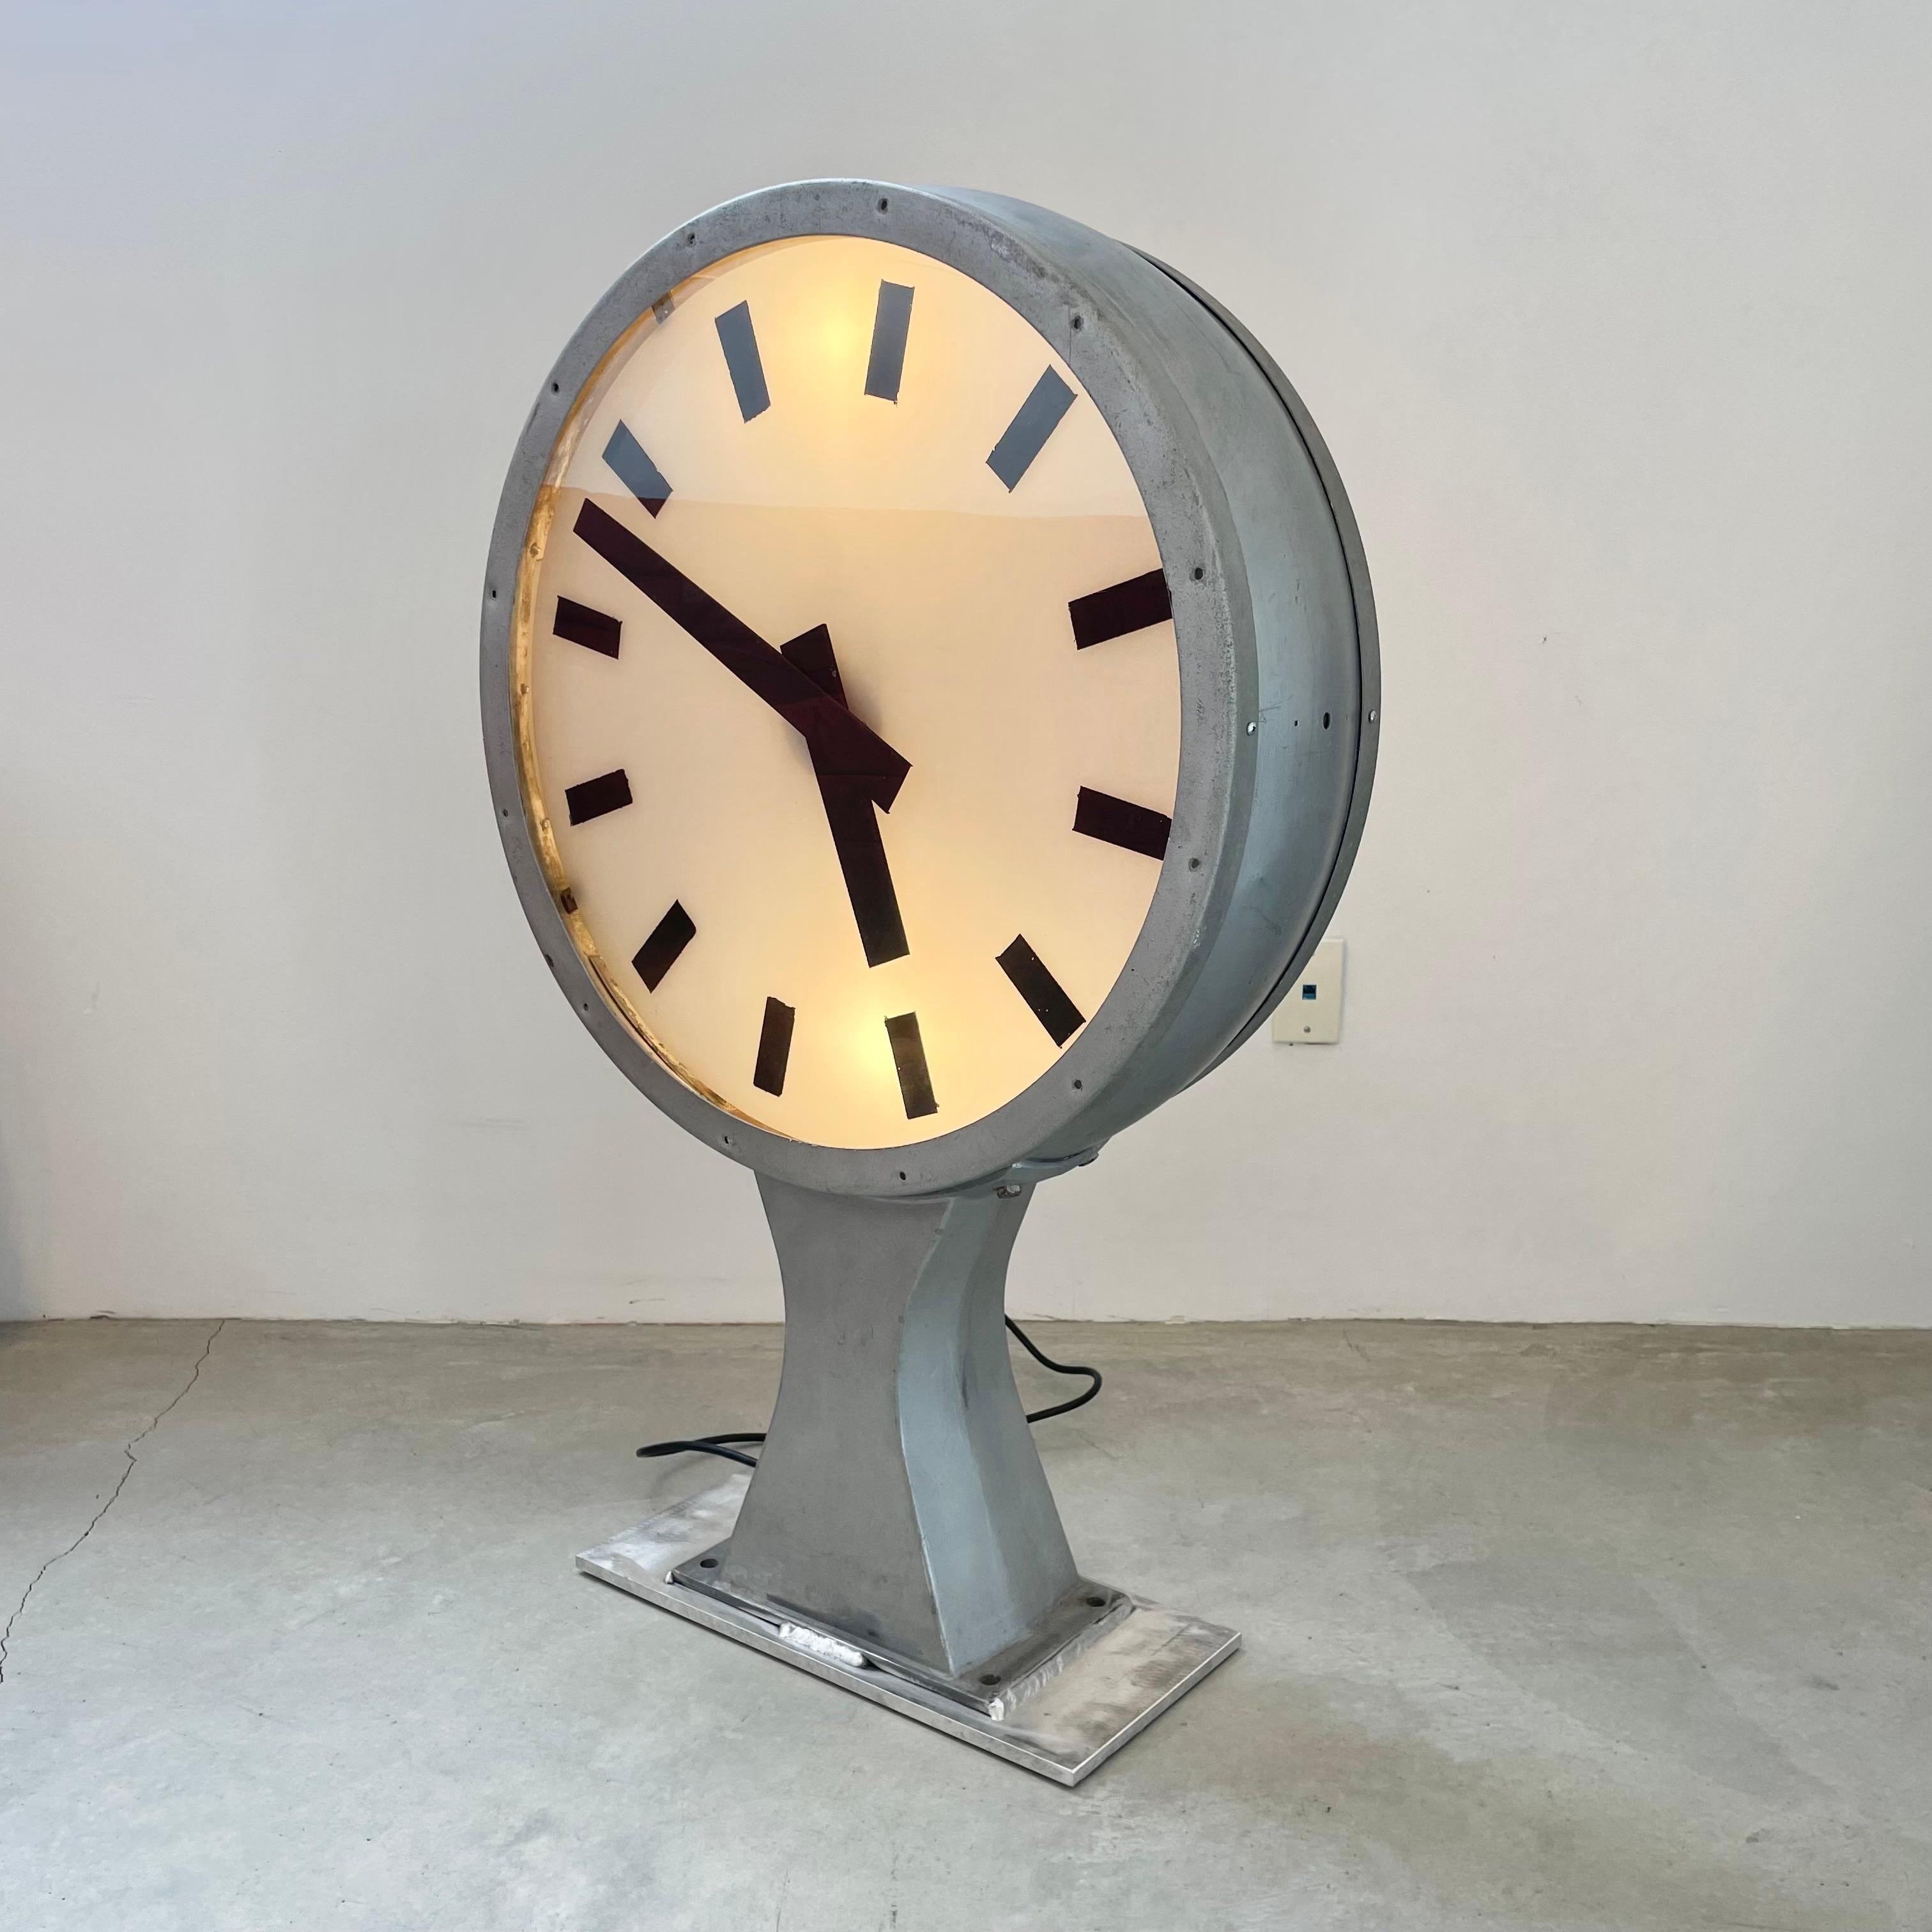 Mid-20th Century Double Sided Train Station Clock, c. 1960s Denmark For Sale